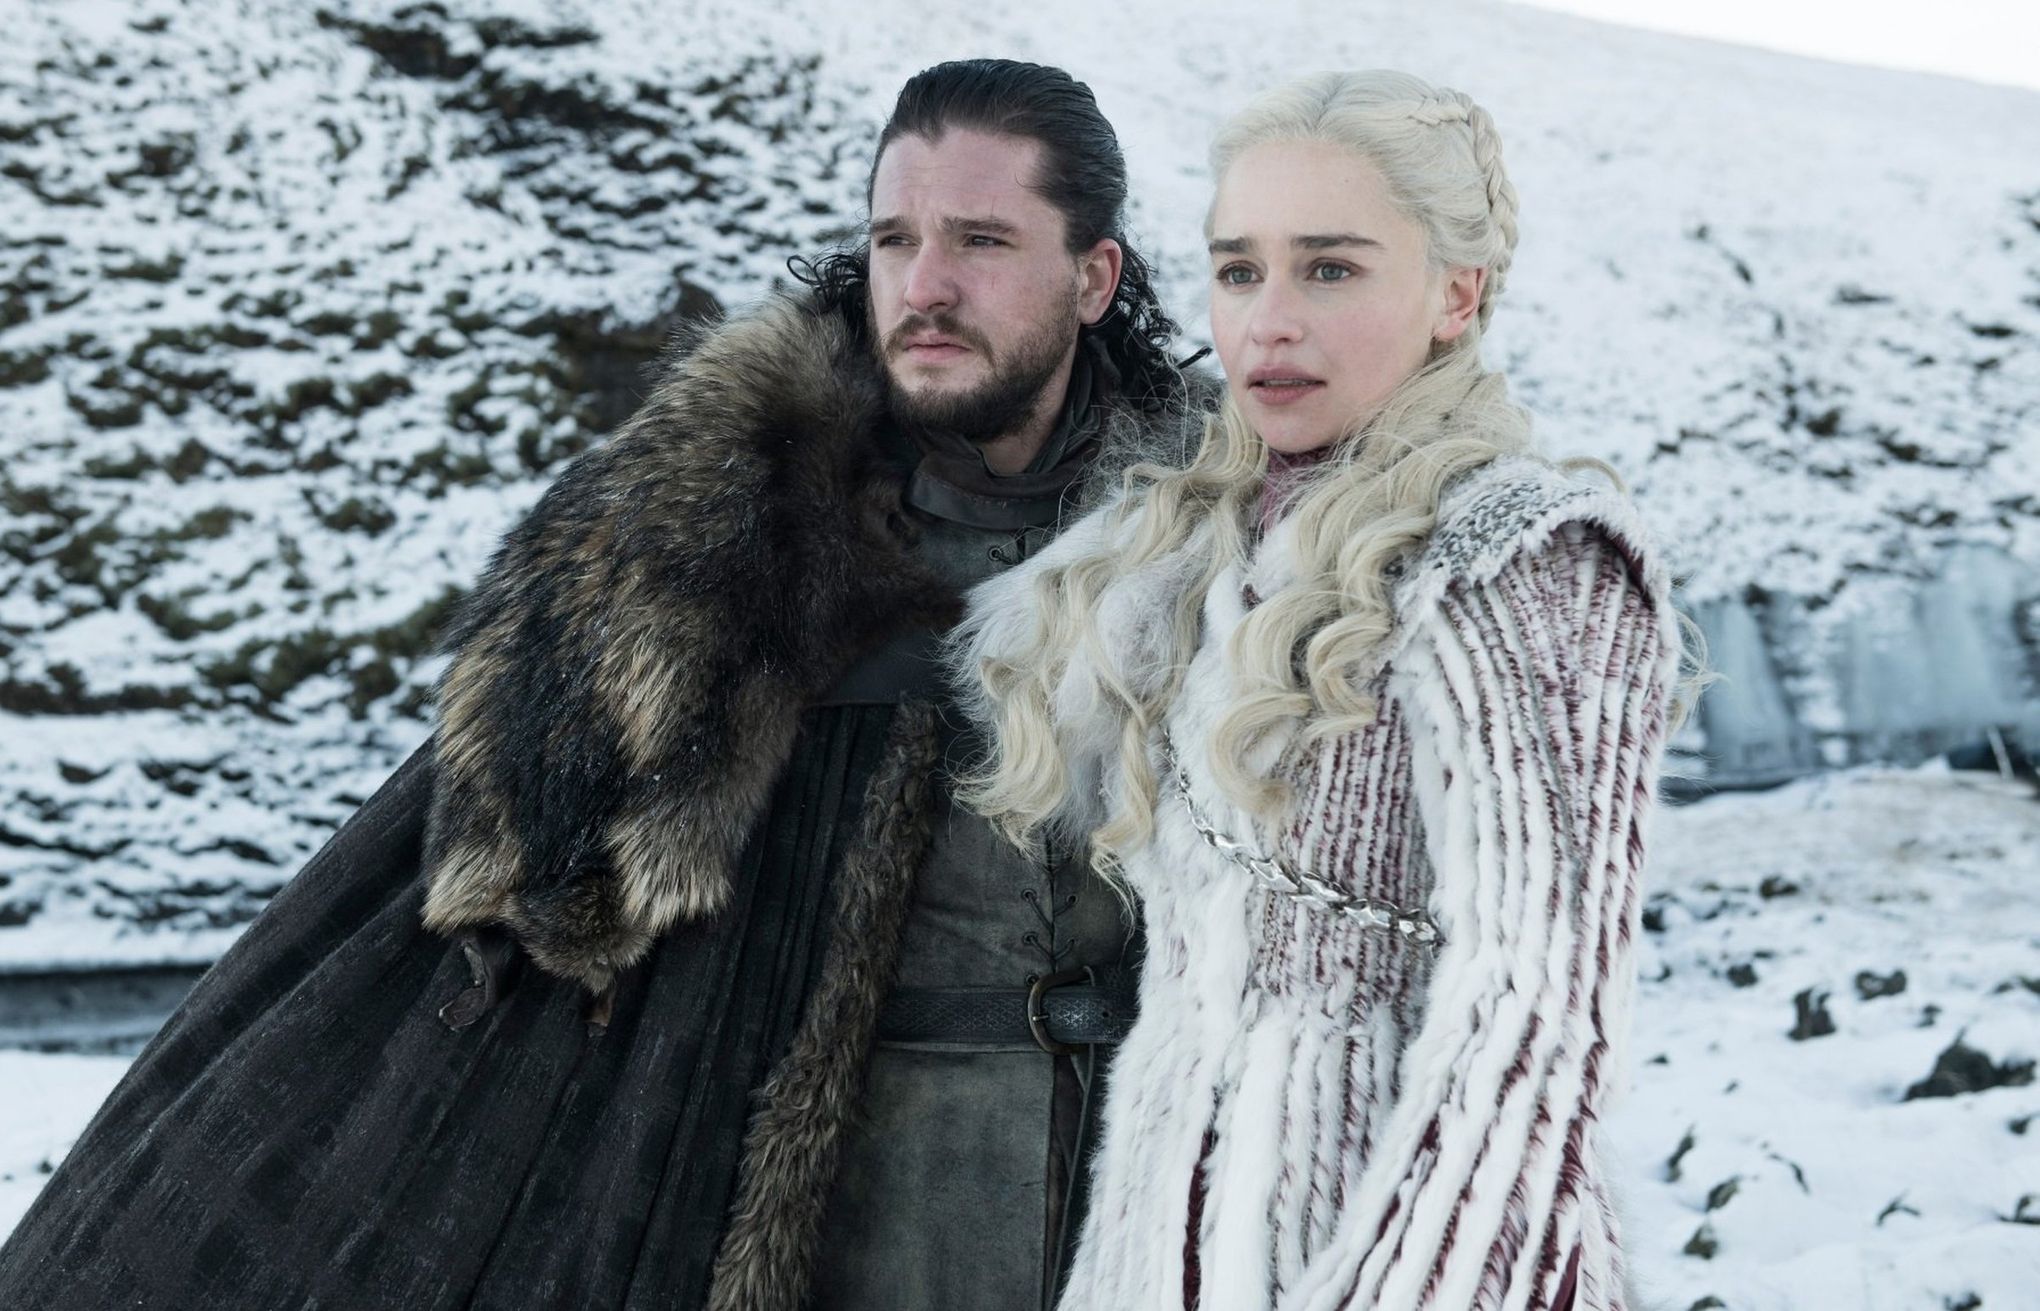 Here's what we know so far about long-awaited Game of Thrones prequel